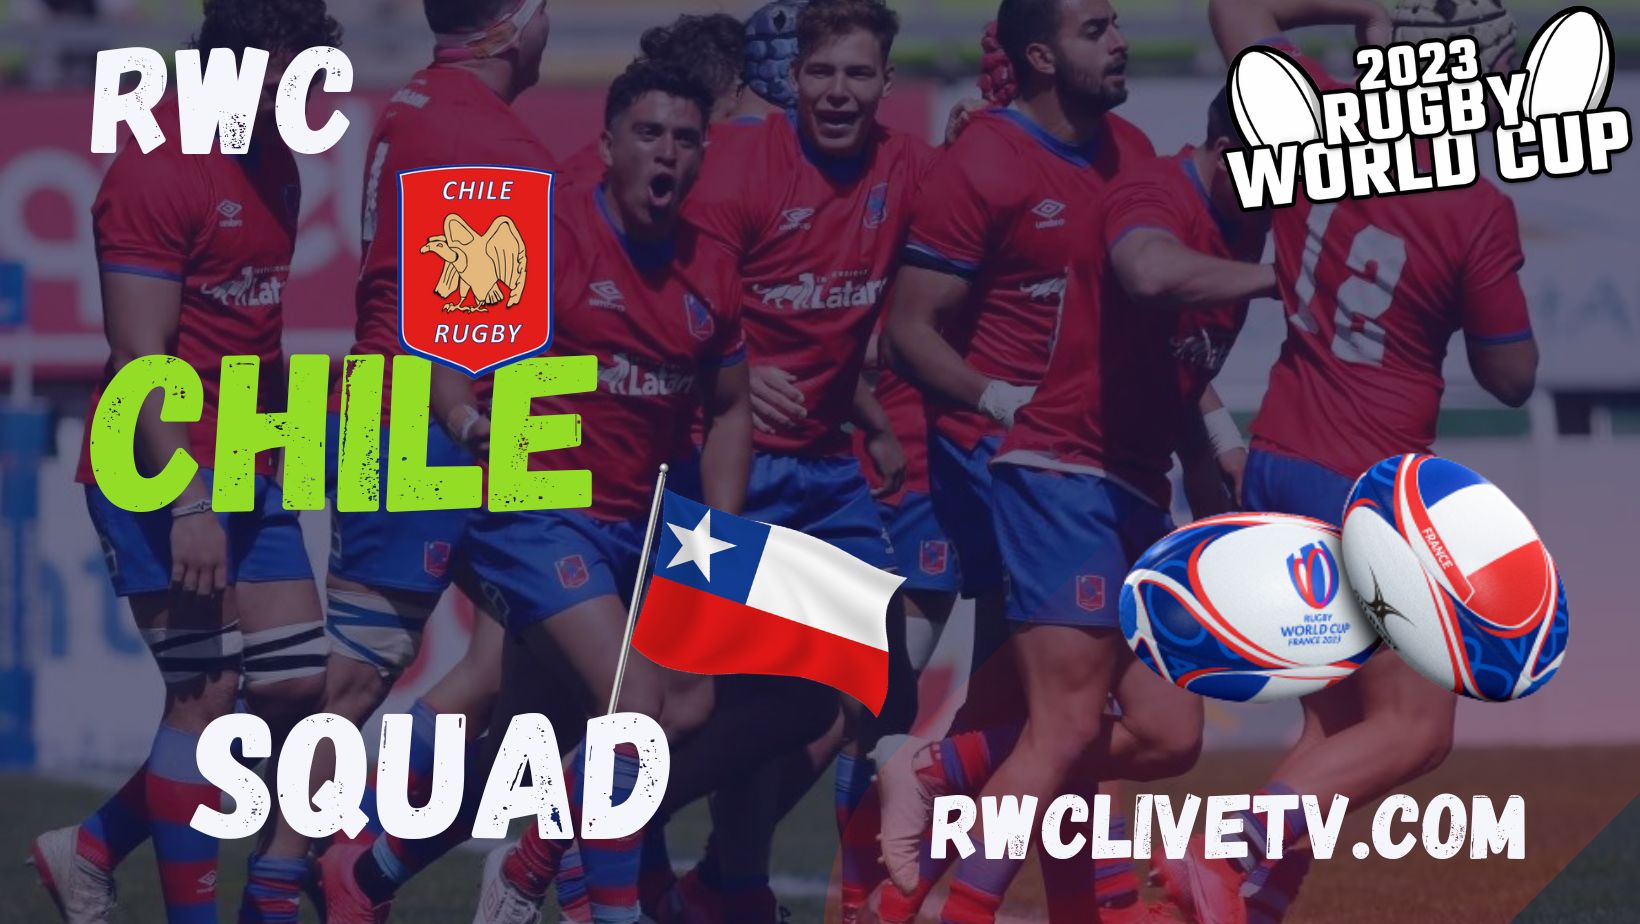 chile-rwc-team-2023-squad-schedule-how-to-watch-players-stats